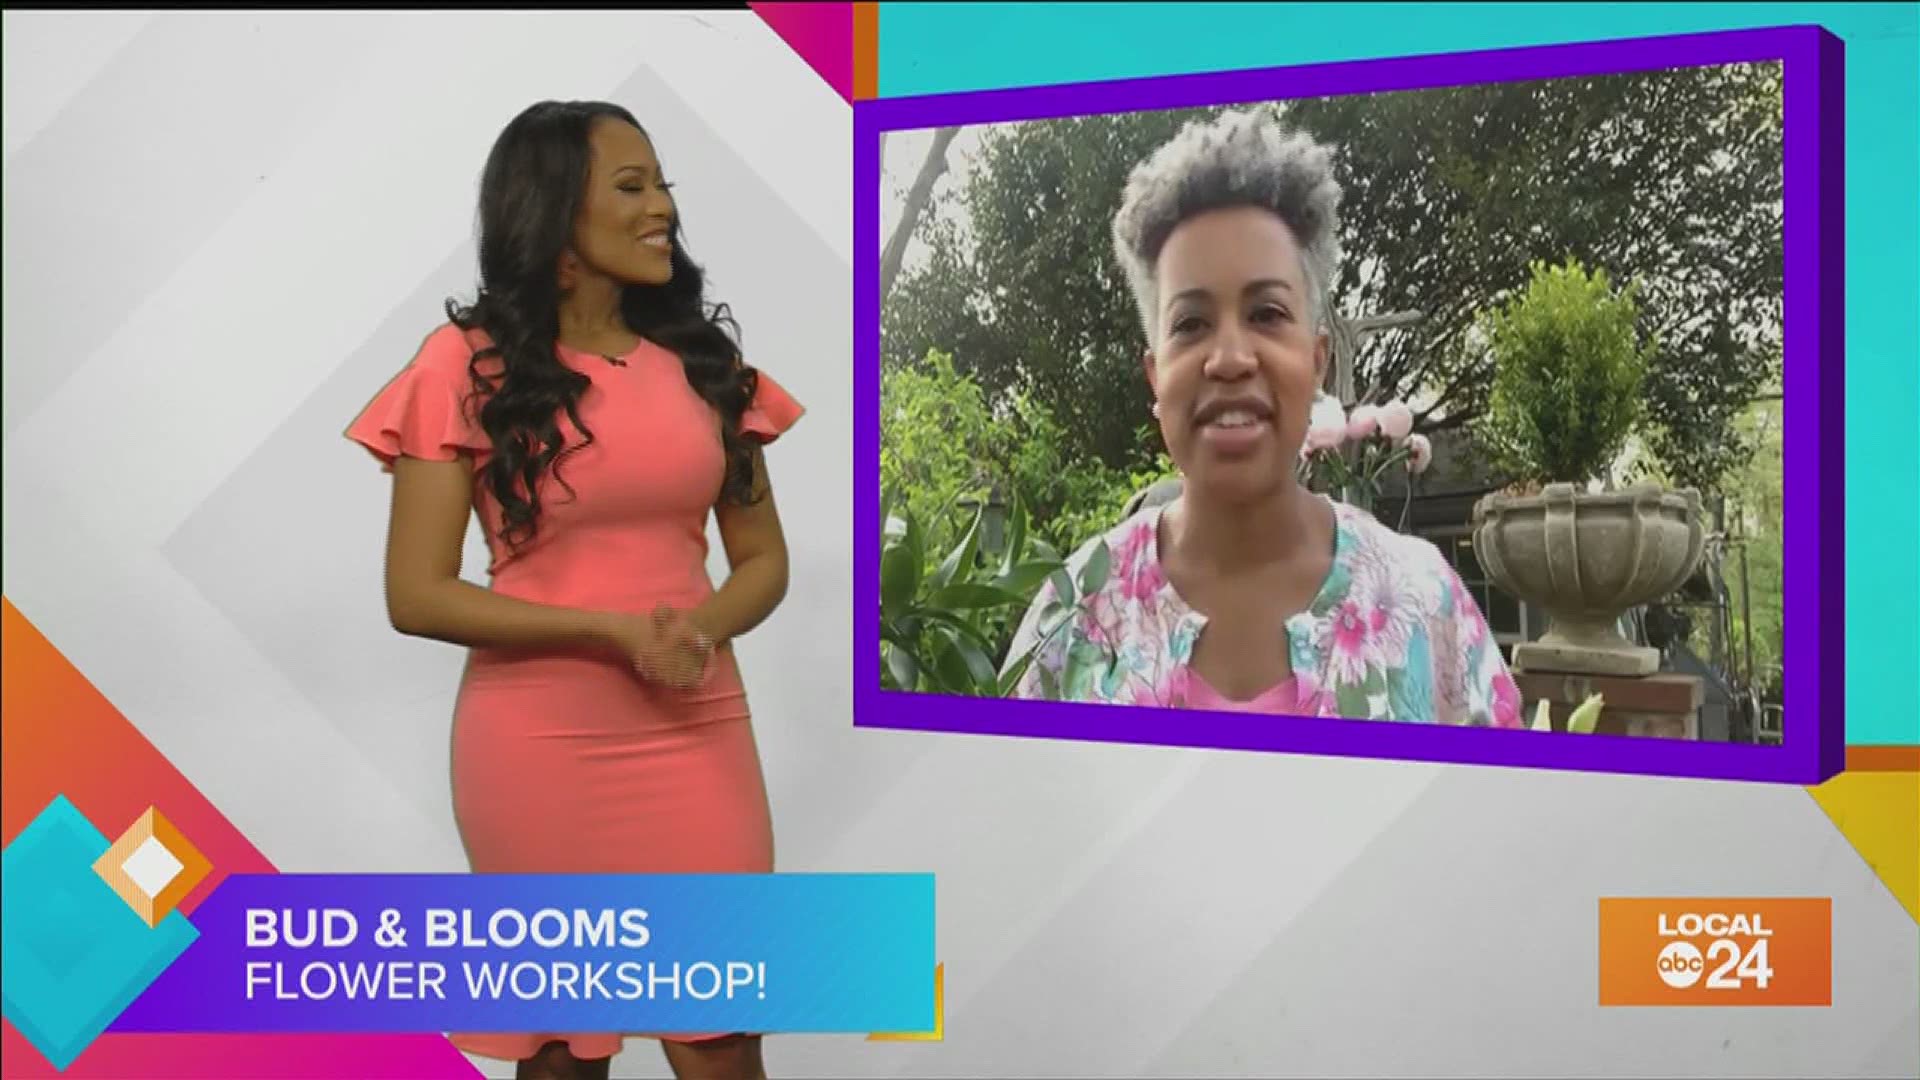 Looking to brighten your home this spring? Join host Sydney Neely with guest star Aisha Crivens as we take a look at how to make a basic floral arrangement.